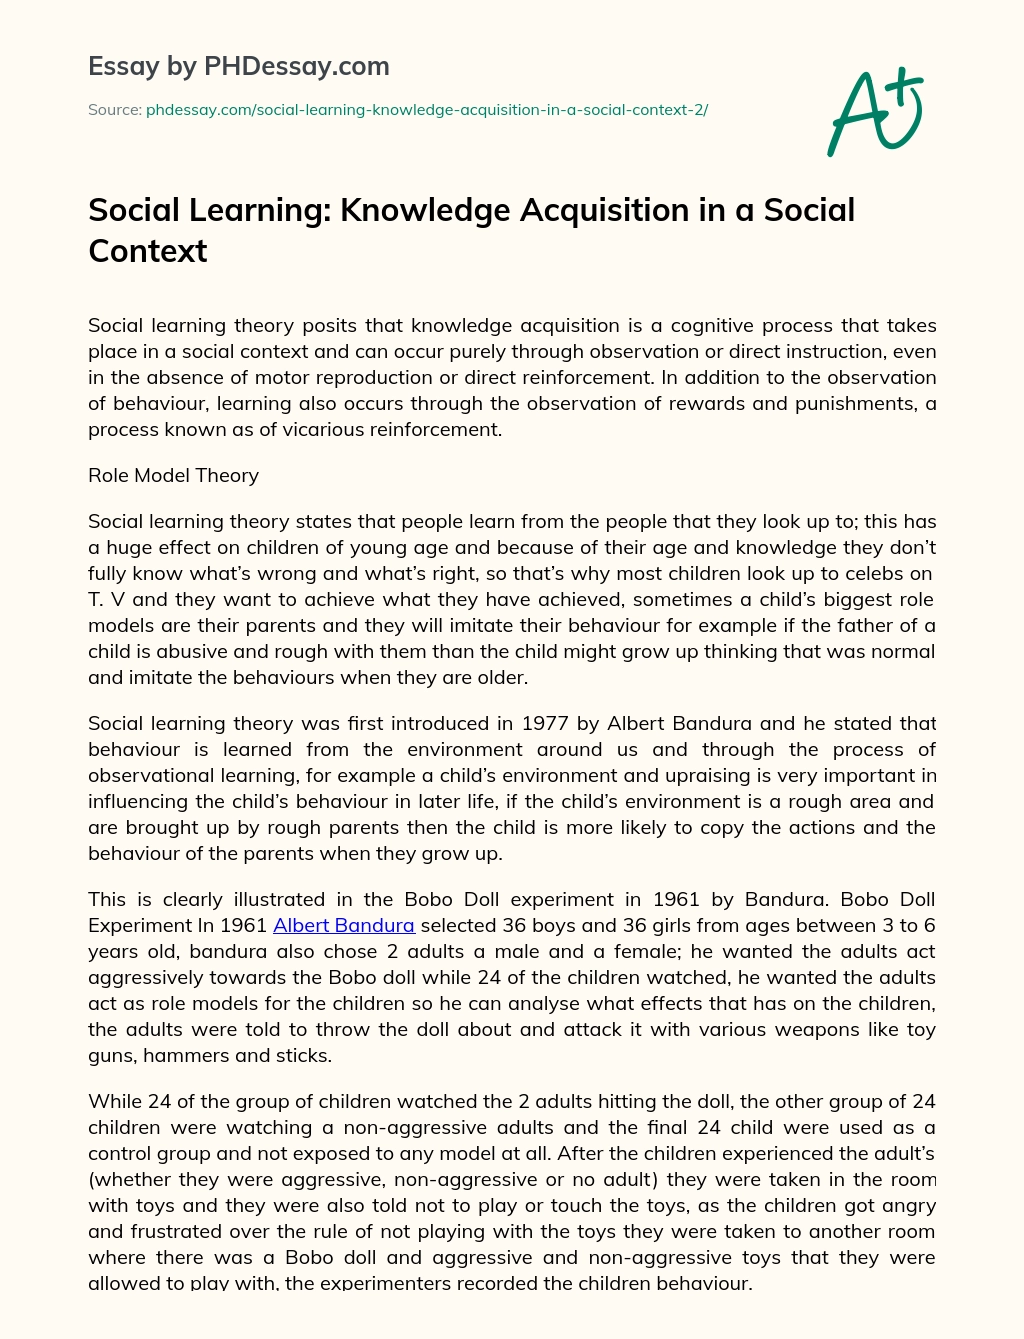 Social Learning: Knowledge Acquisition in a Social Context essay